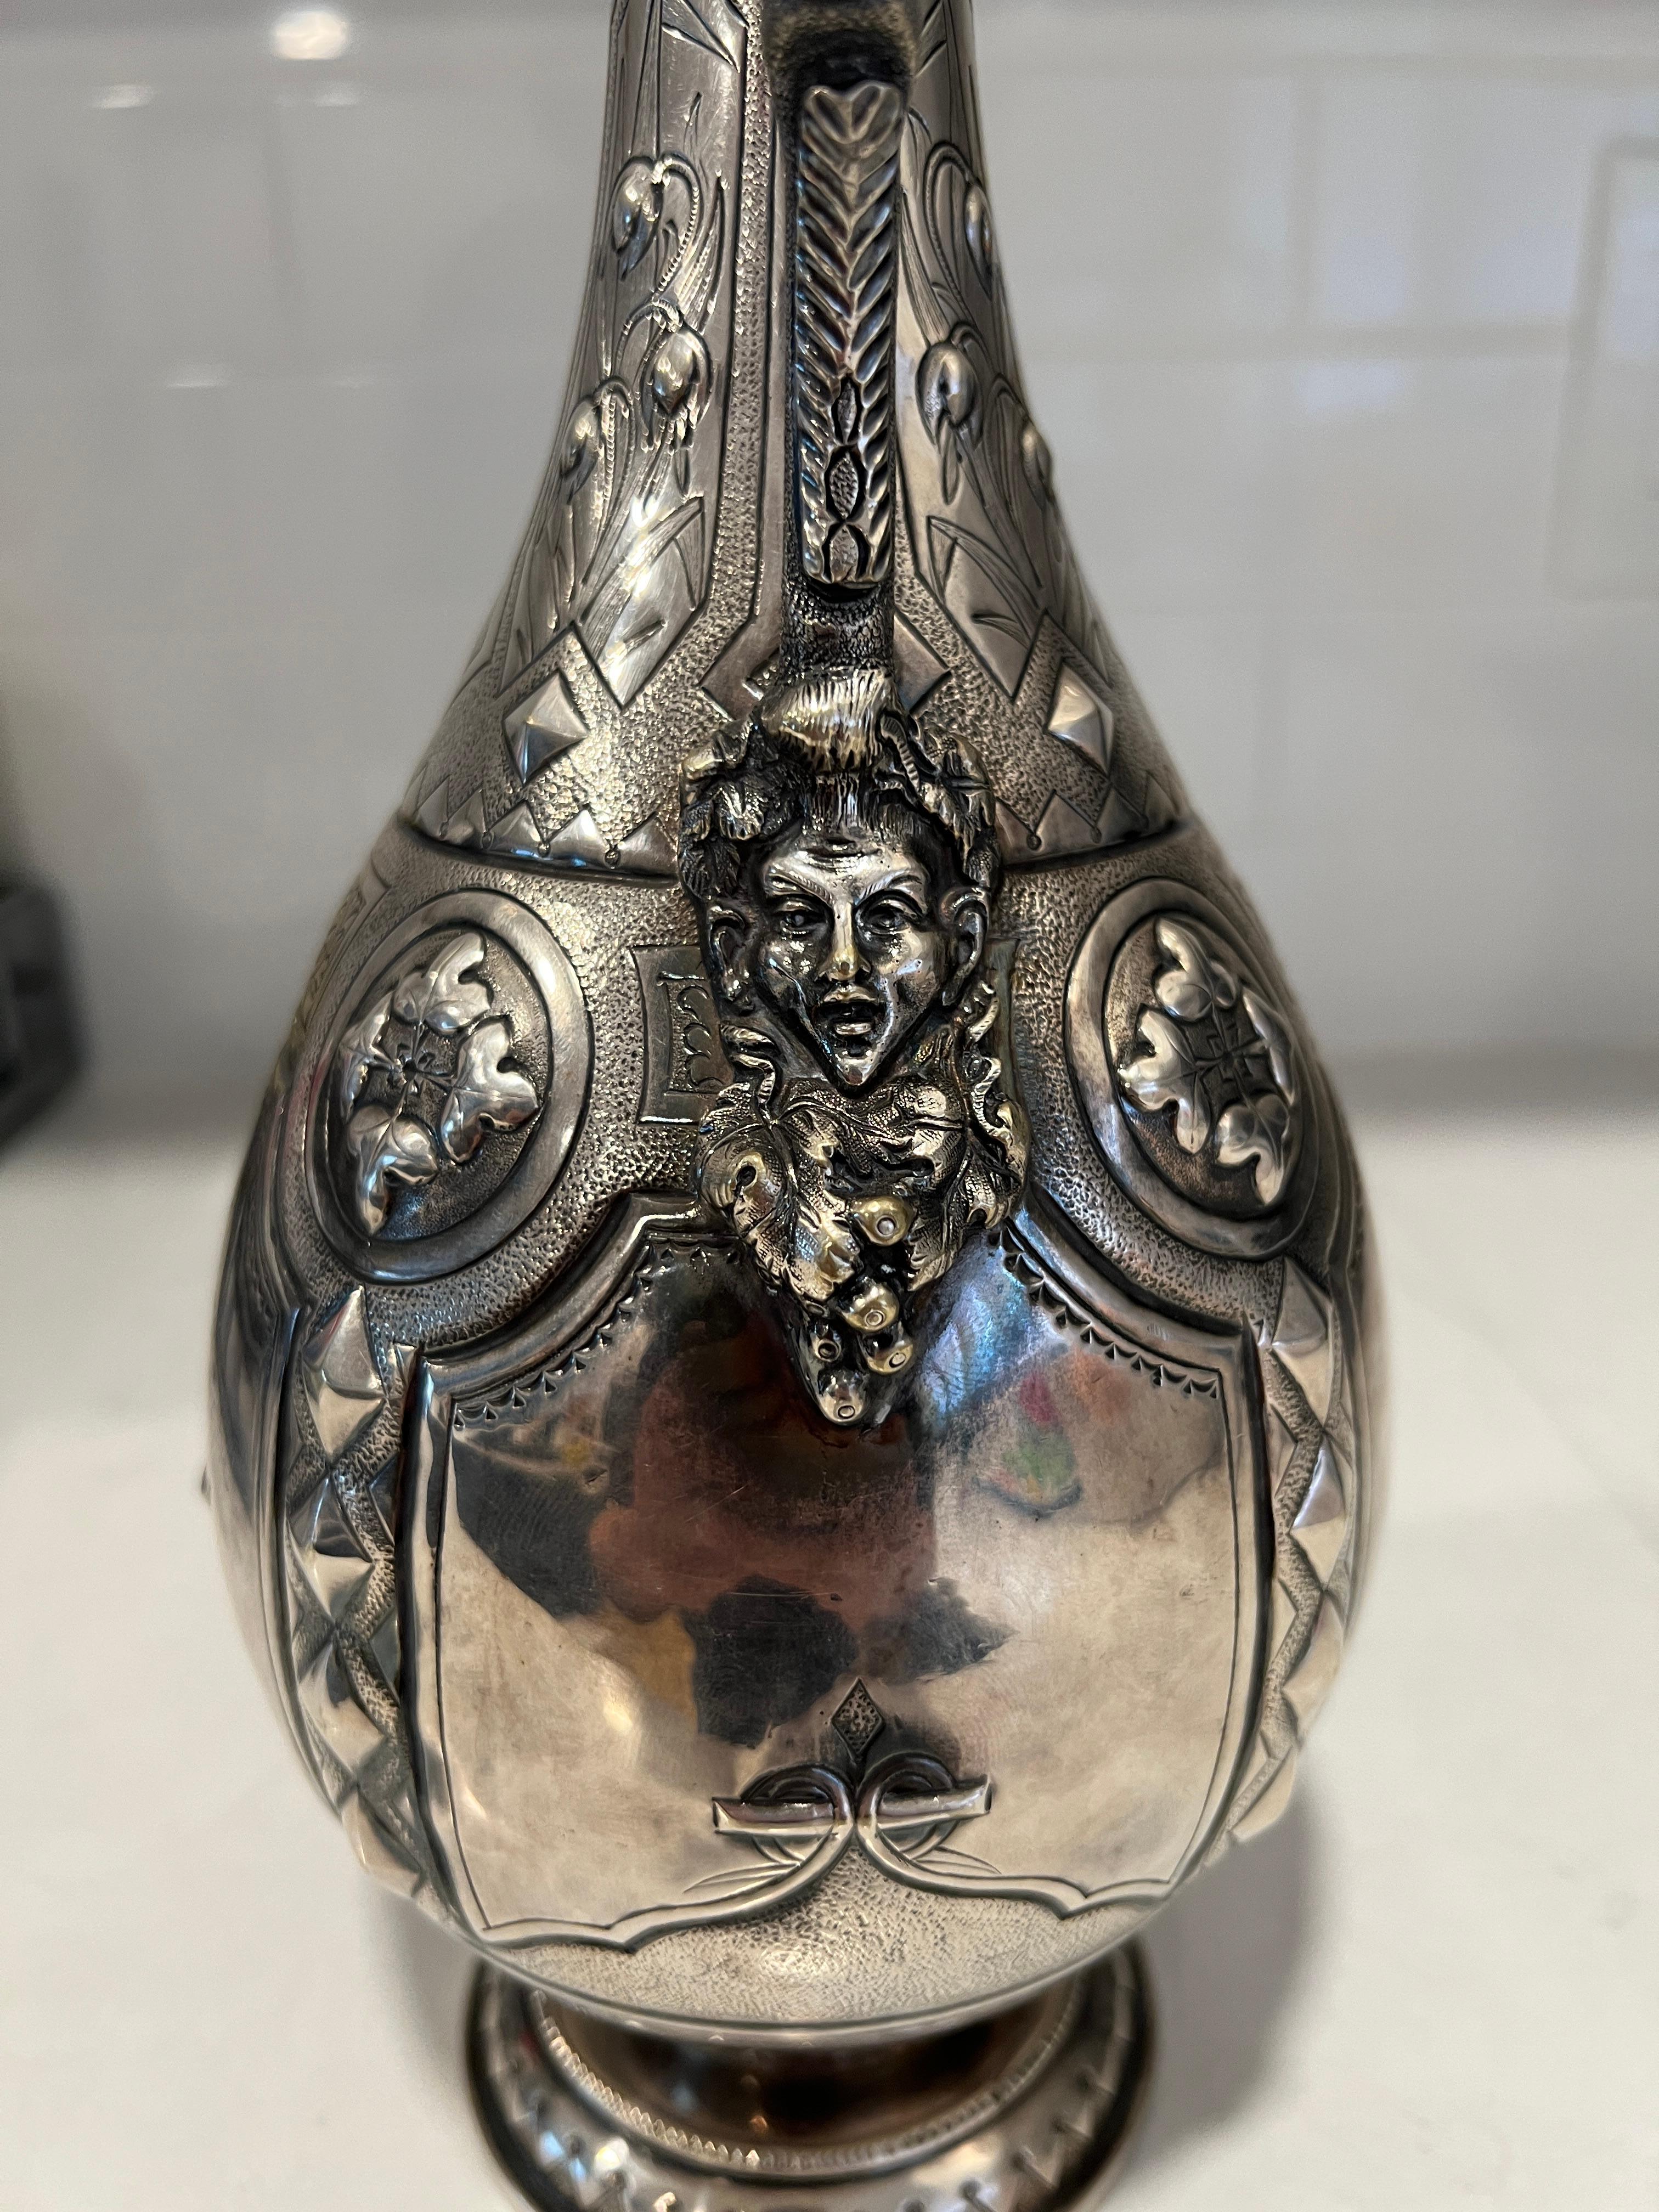 American, circa 1875. 

An impressively detailed and hand crafted American coin silver ewer or pitcher featuring a beautiful nude figural female with sculpted foliate detail handle morphing into a classical mask on the body. A hand hammered surface,